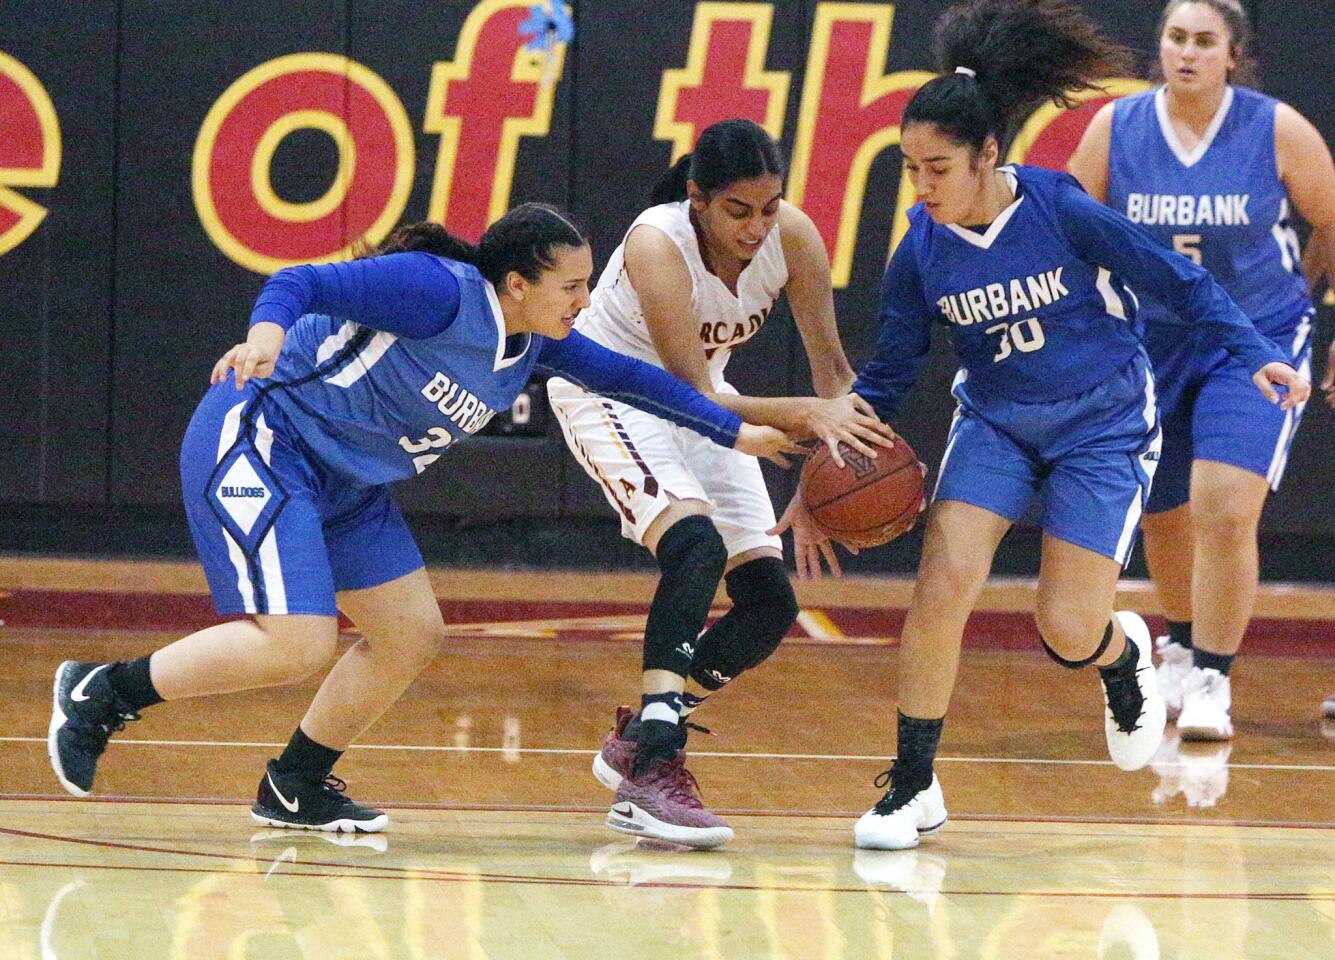 Burbank's Emily Monterey and Roxy Paynid steal the ball from Arcadia's Sahana Saikumar in a Pacific League girls' basketball game at Arcadia High School on Tuesday, December 4, 2018.